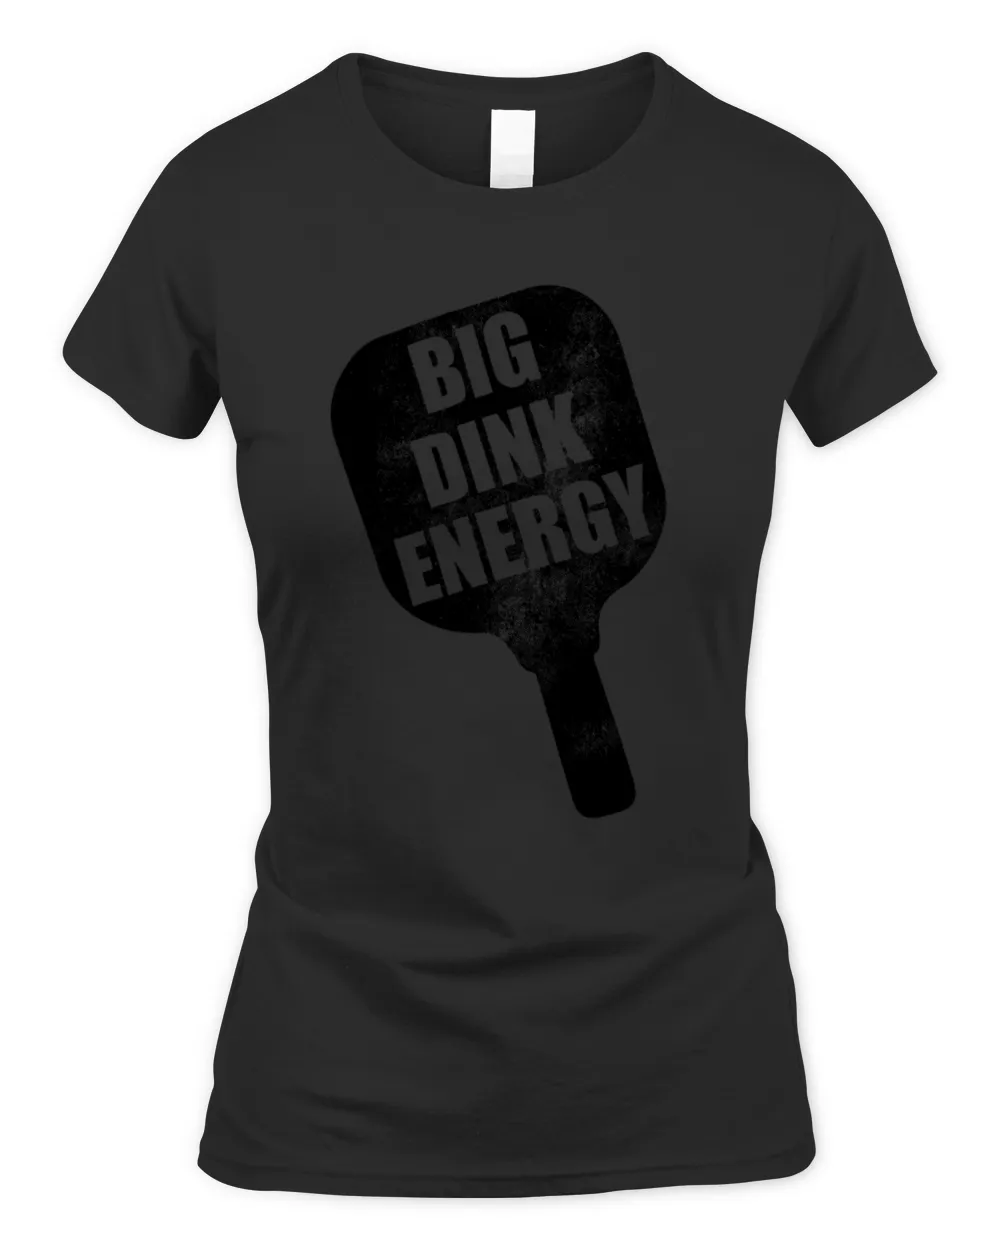 Big Dink Energy, Pickleball Shirts, Sports Shirt Men, Mens T Shirt, Funny Mens Shirt, Funny T Shirt, Pickleball Lover Gifts, Gifts For Dad